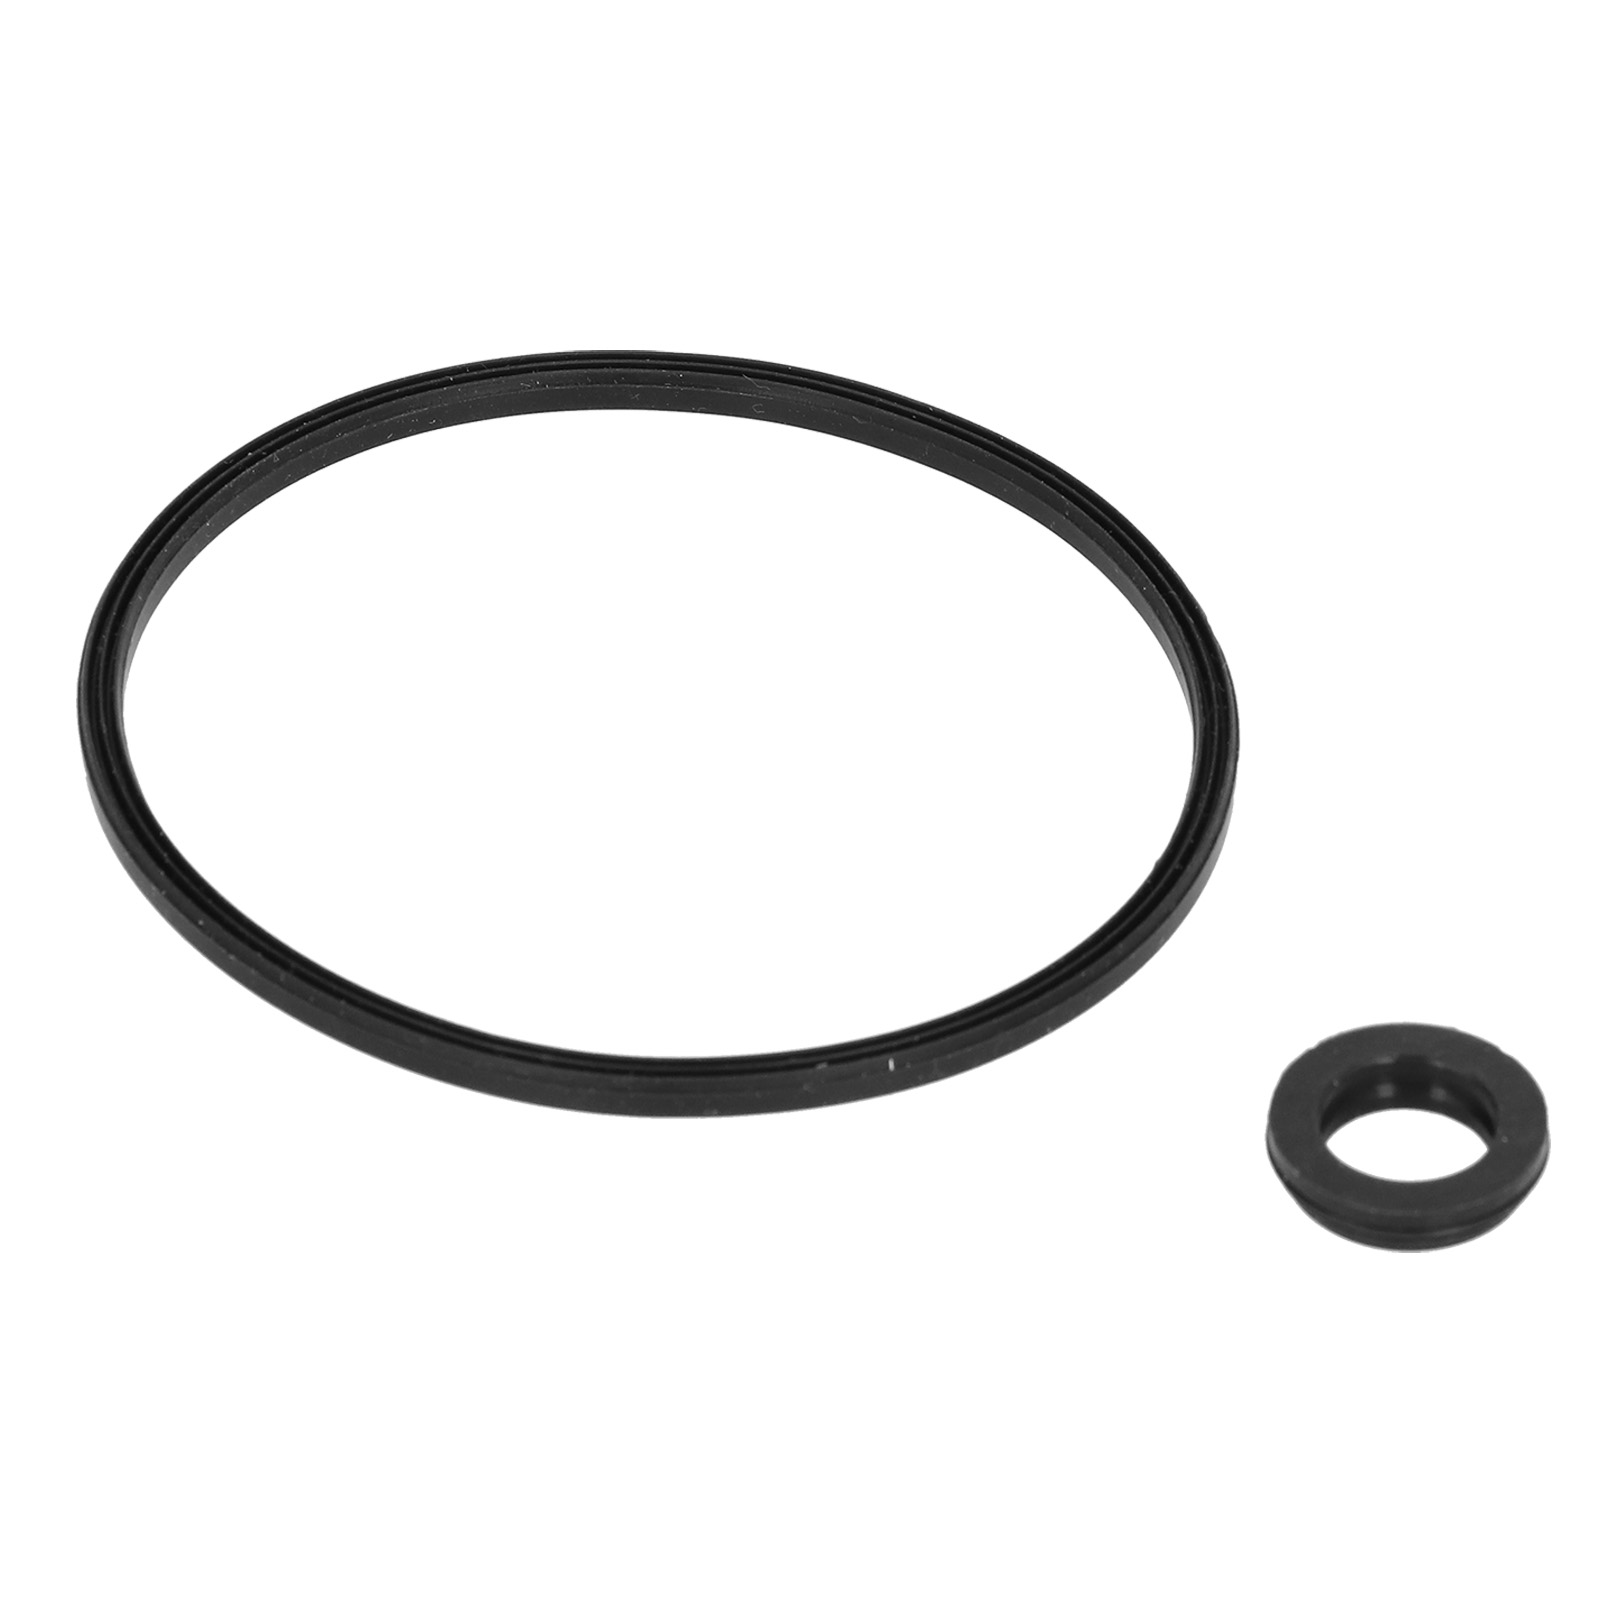 Sealing Ring Silicone Gasket Juicer Cup Lid Accessories O Ring ...